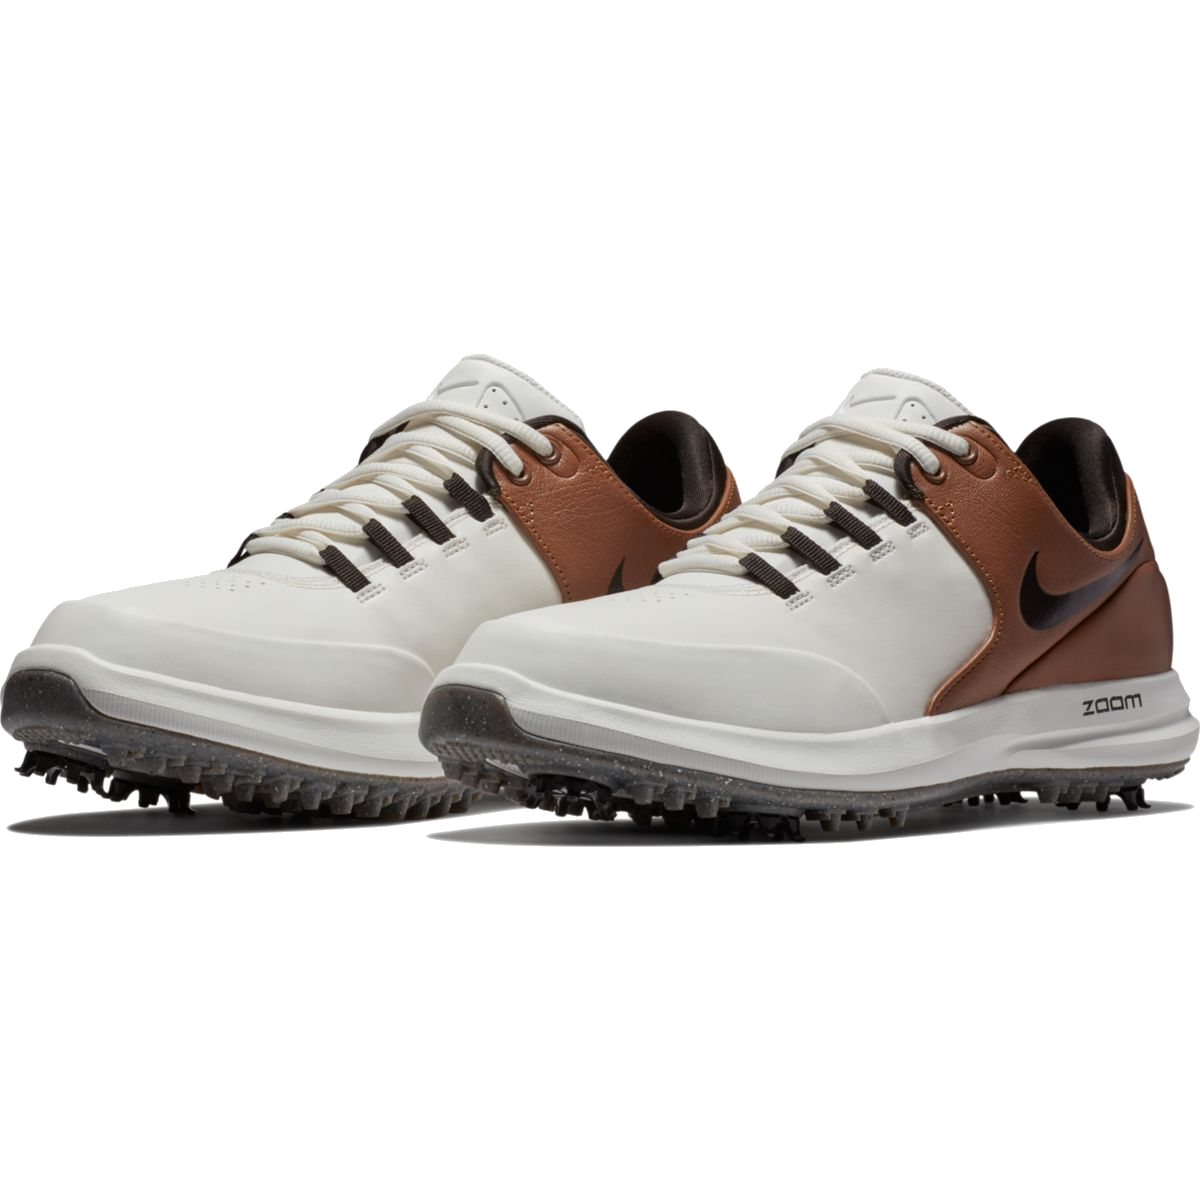 nike men's air zoom accurate golf shoes